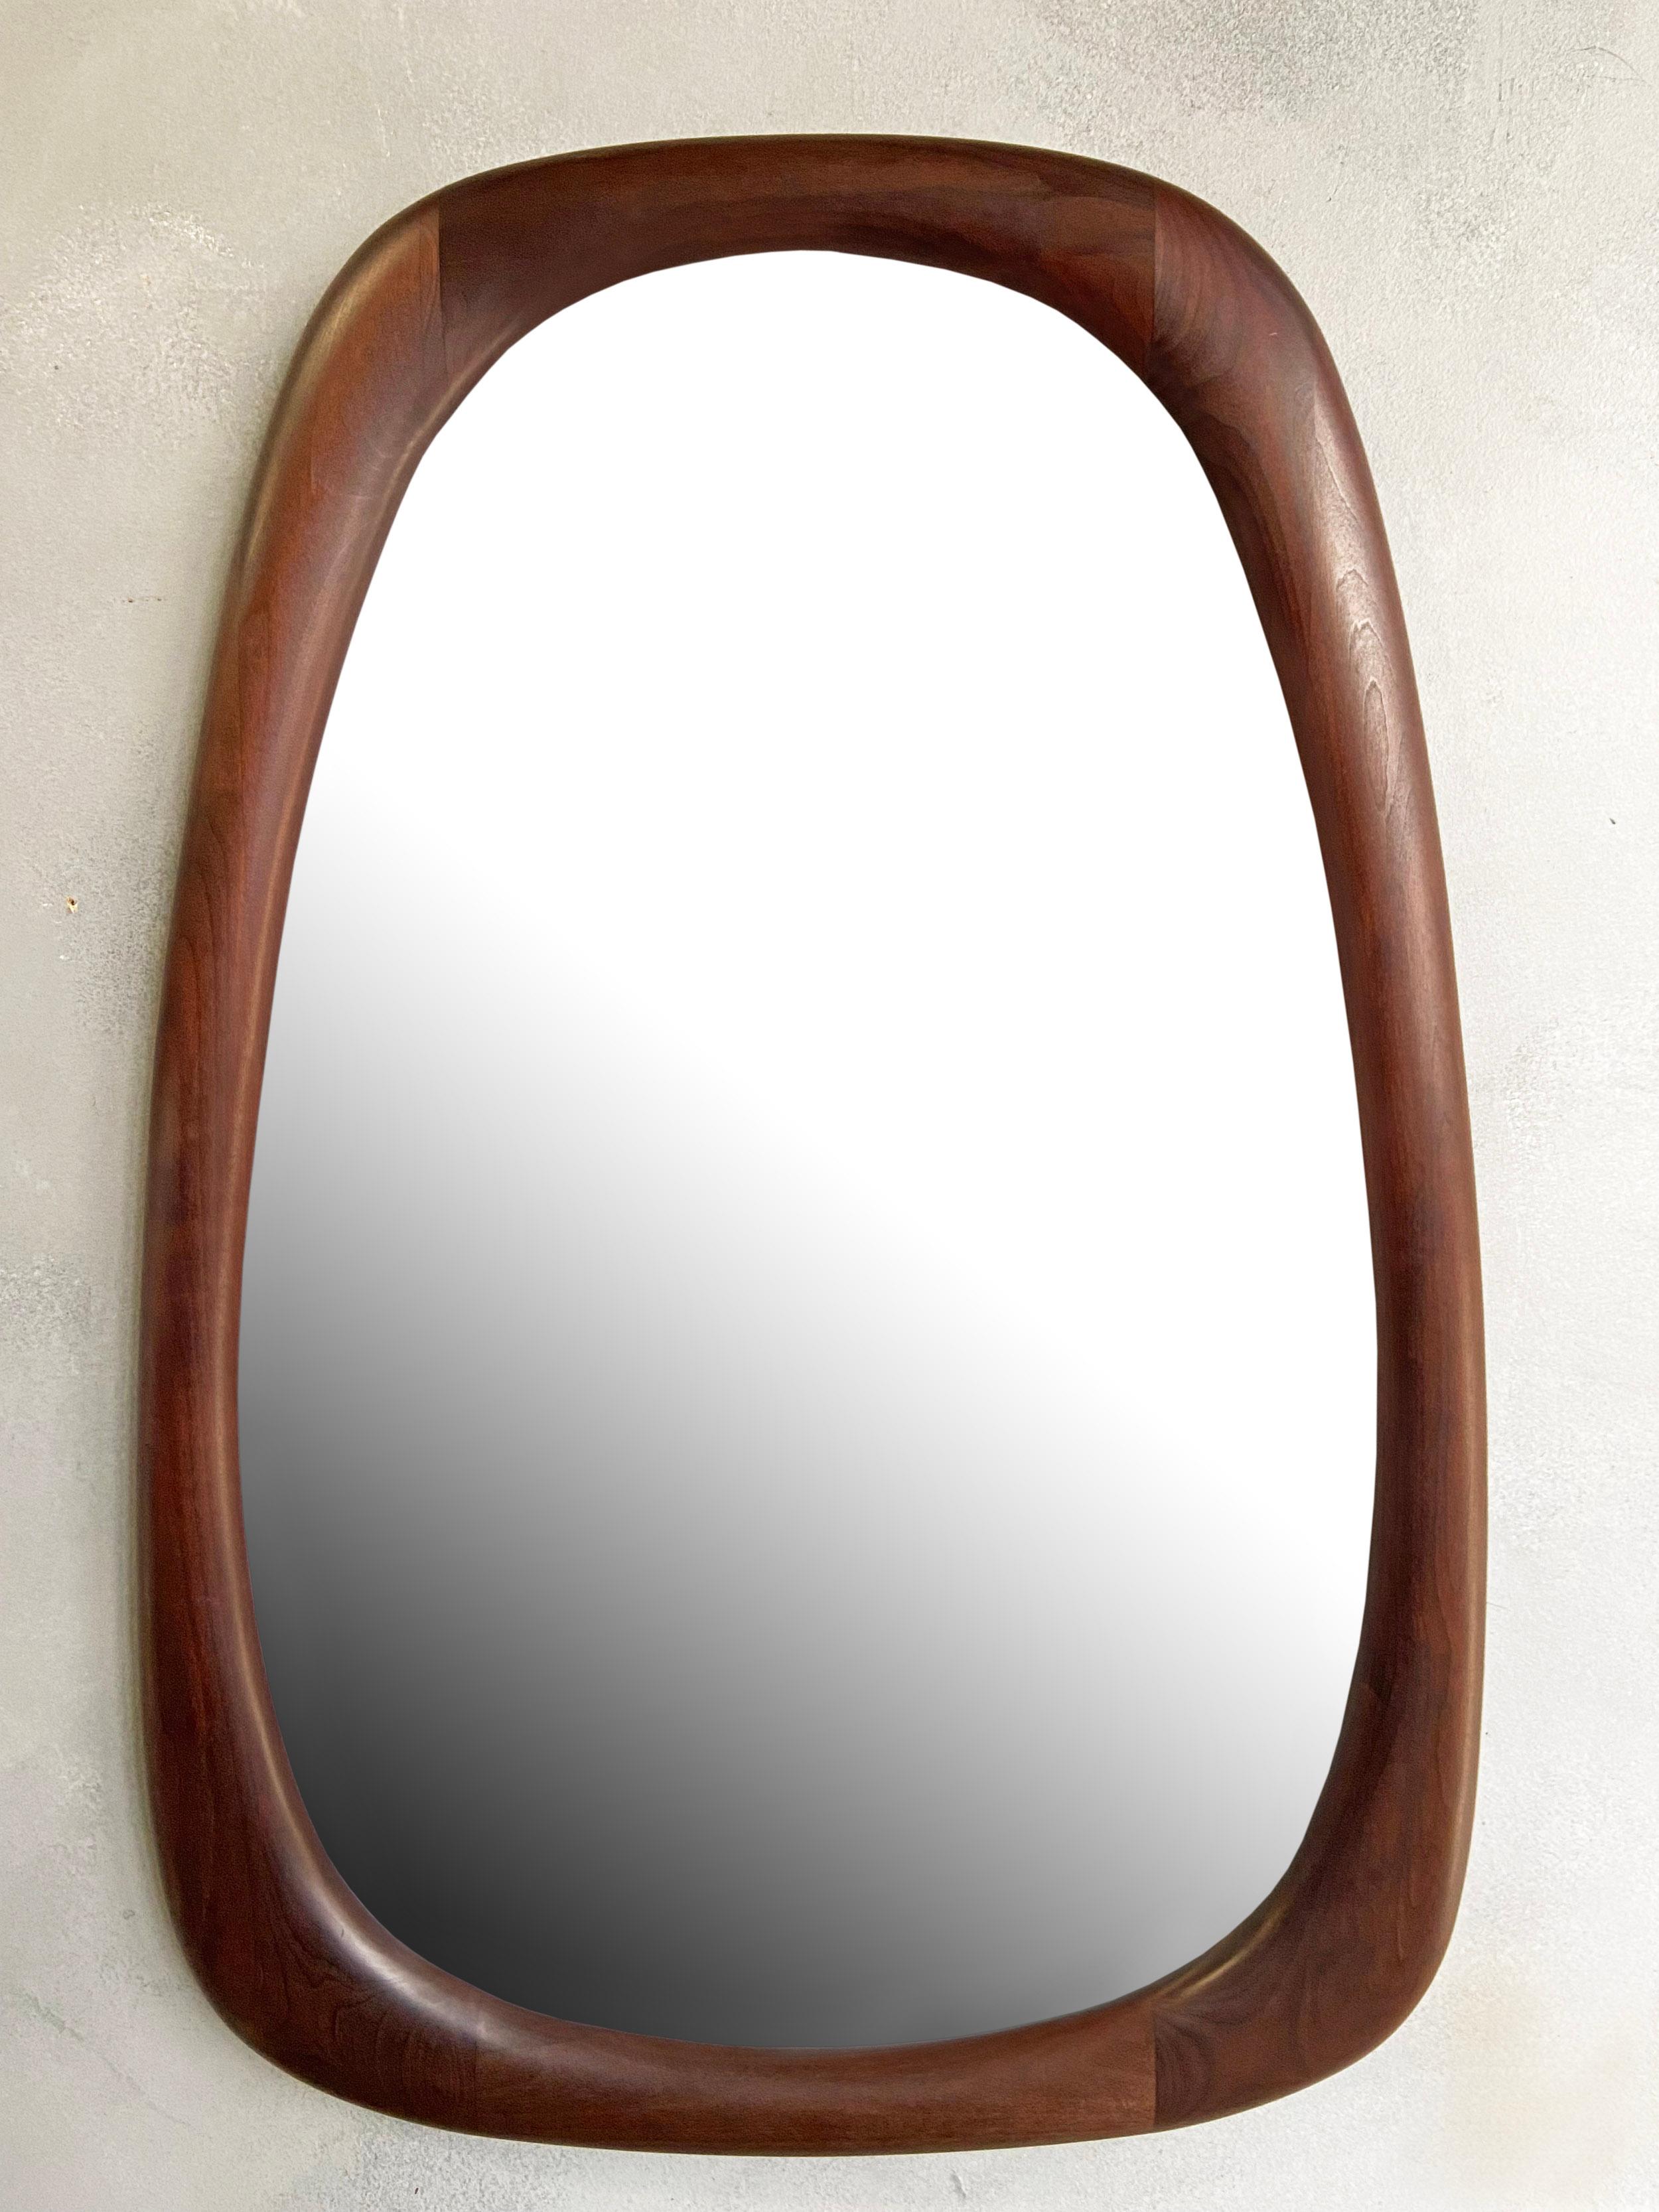 For your consideration is this beautifully sculpted mirror by Dean Santner. Master craftsman Dean Santner designs are part of the American Modern Craft movement along side Wendell Castle, Nakashima, Phillip Powell to name a few

This hand sculpted